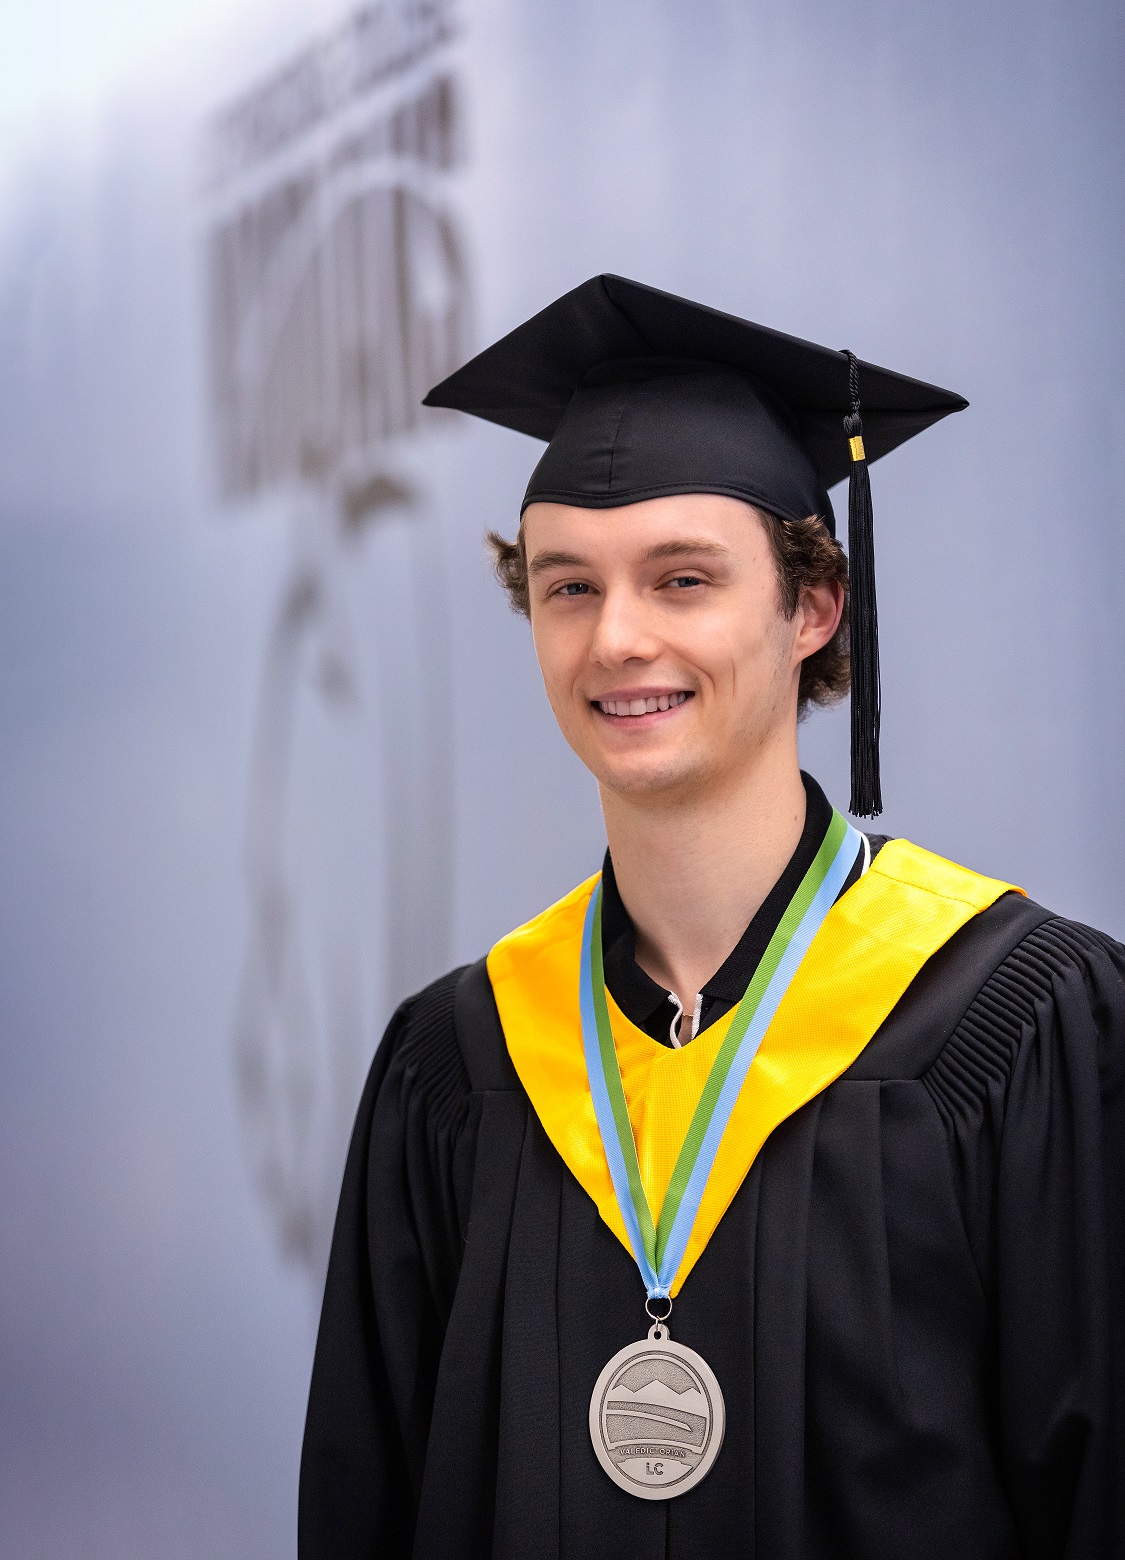 A young man wearing a graduation cap and gown smiles for the camera.